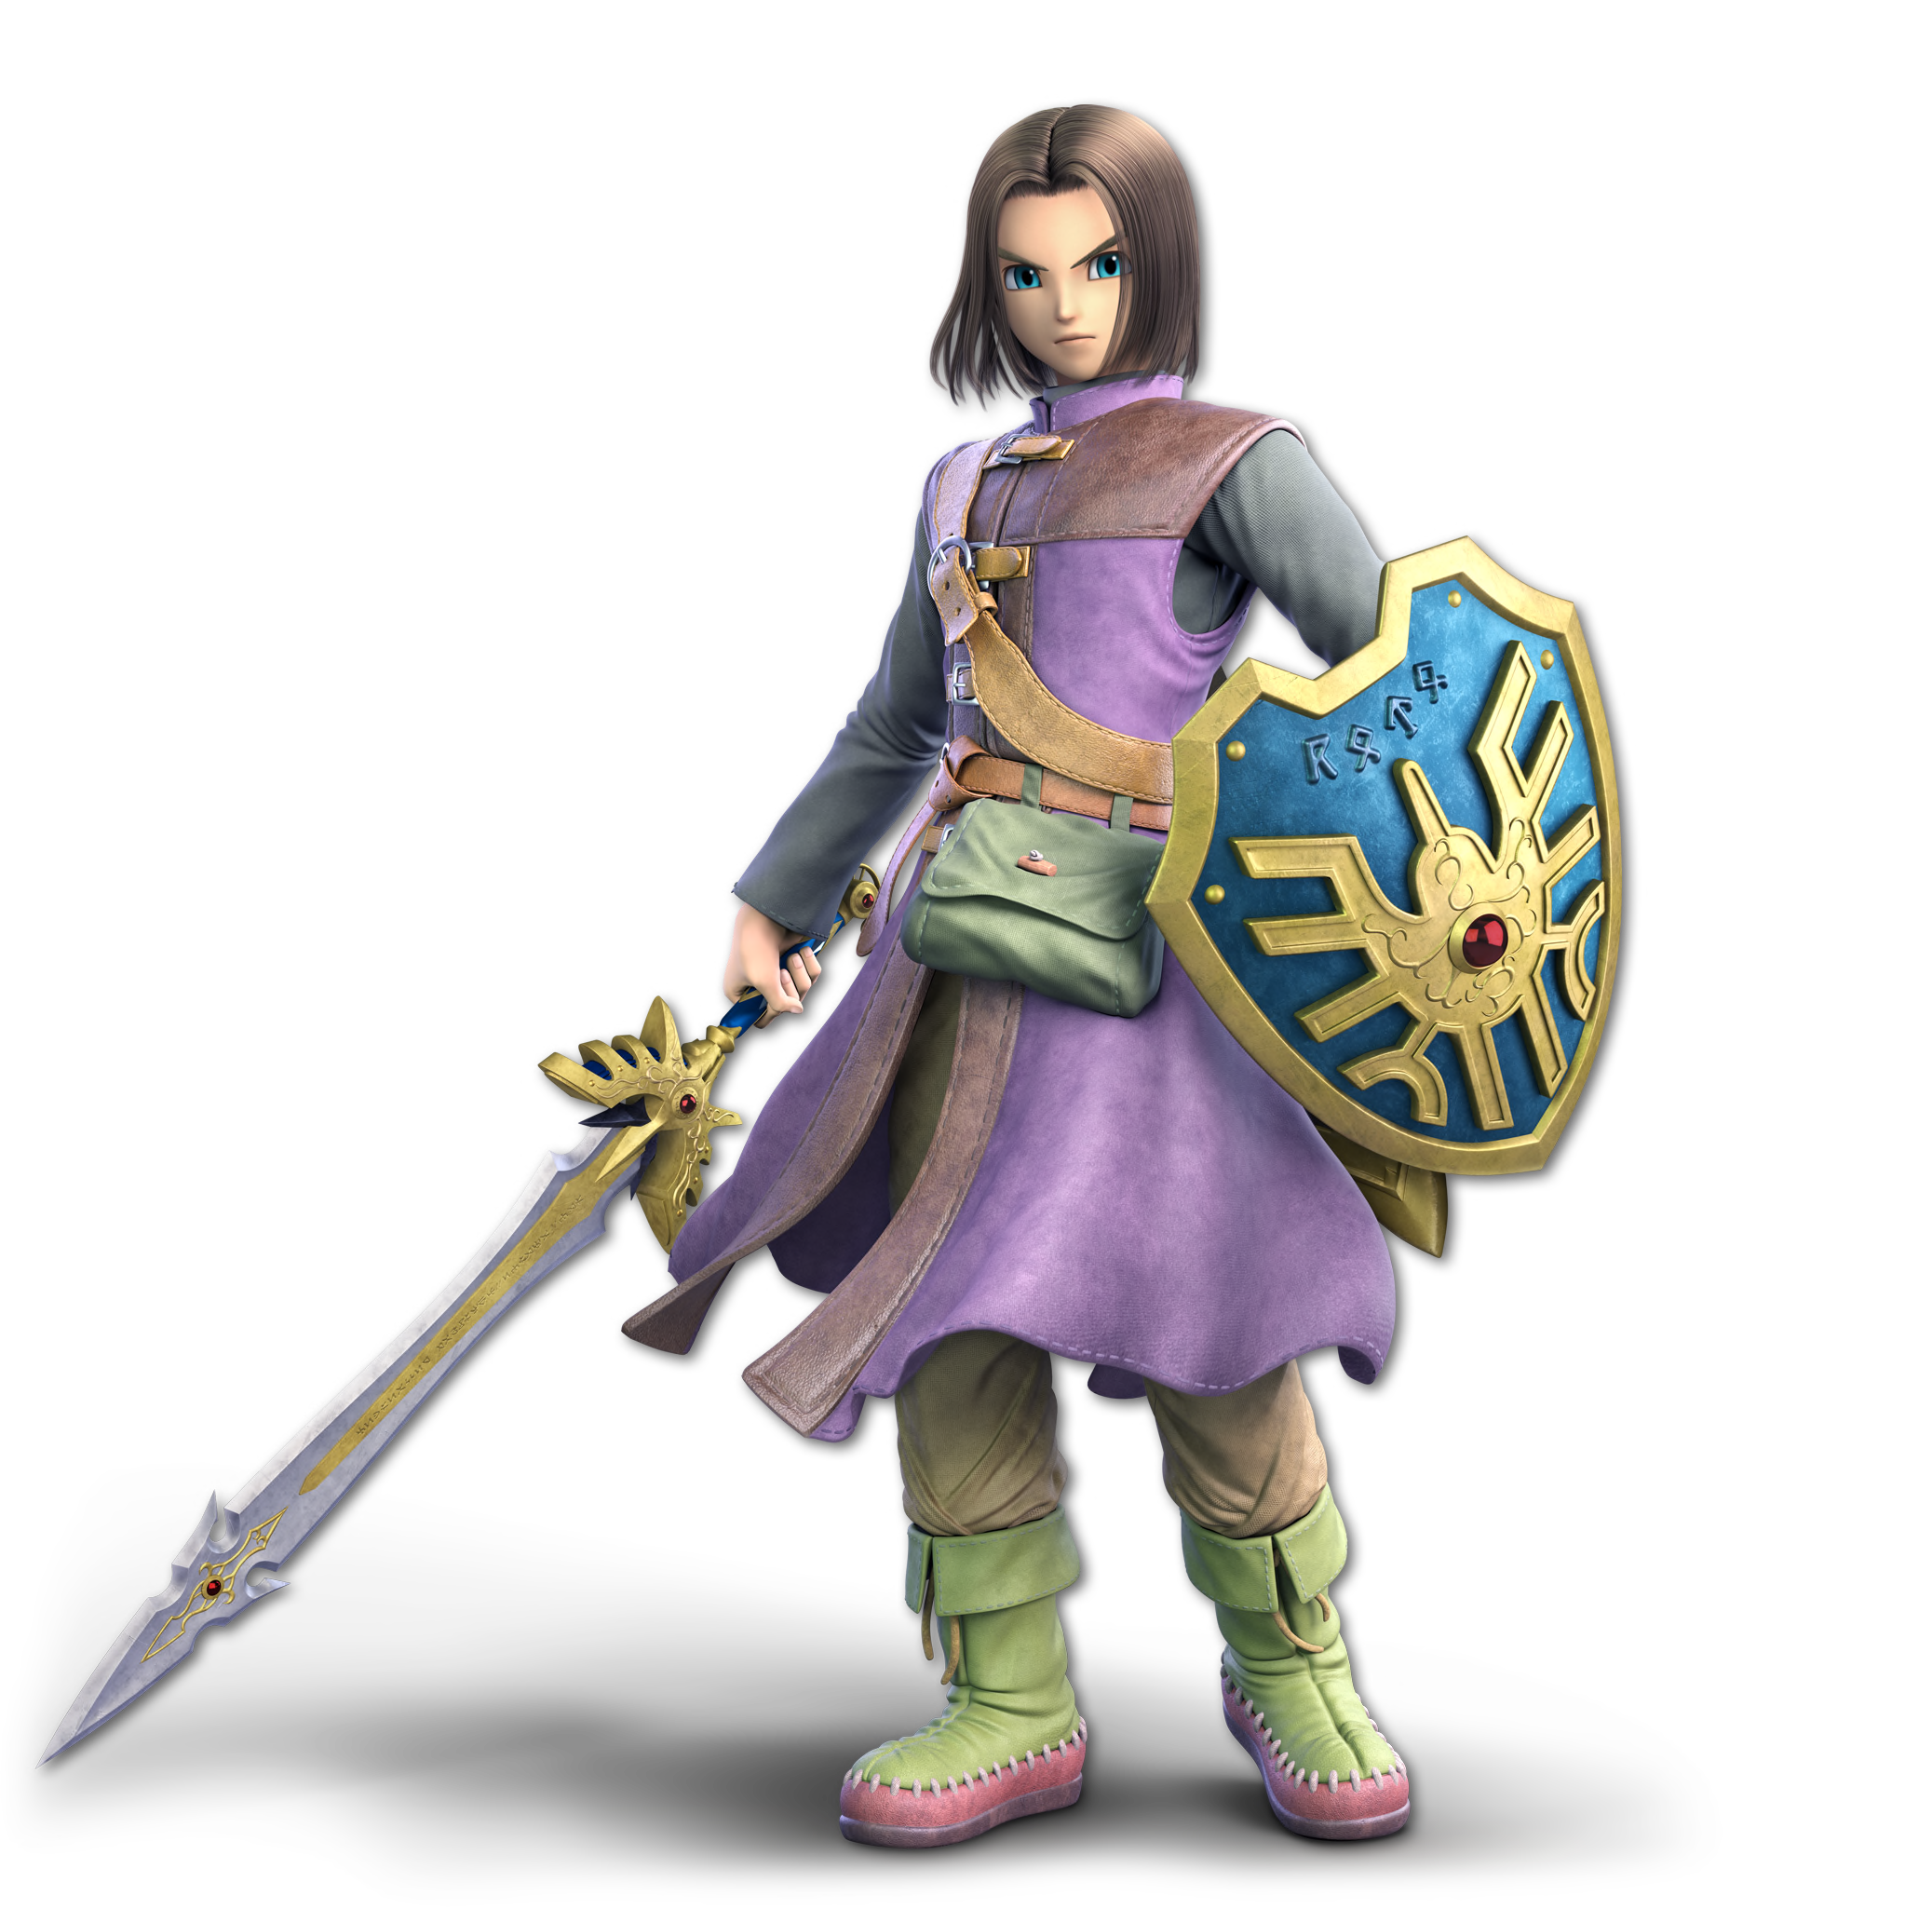 Luminary Render From Super Smash Bros. Ultimate